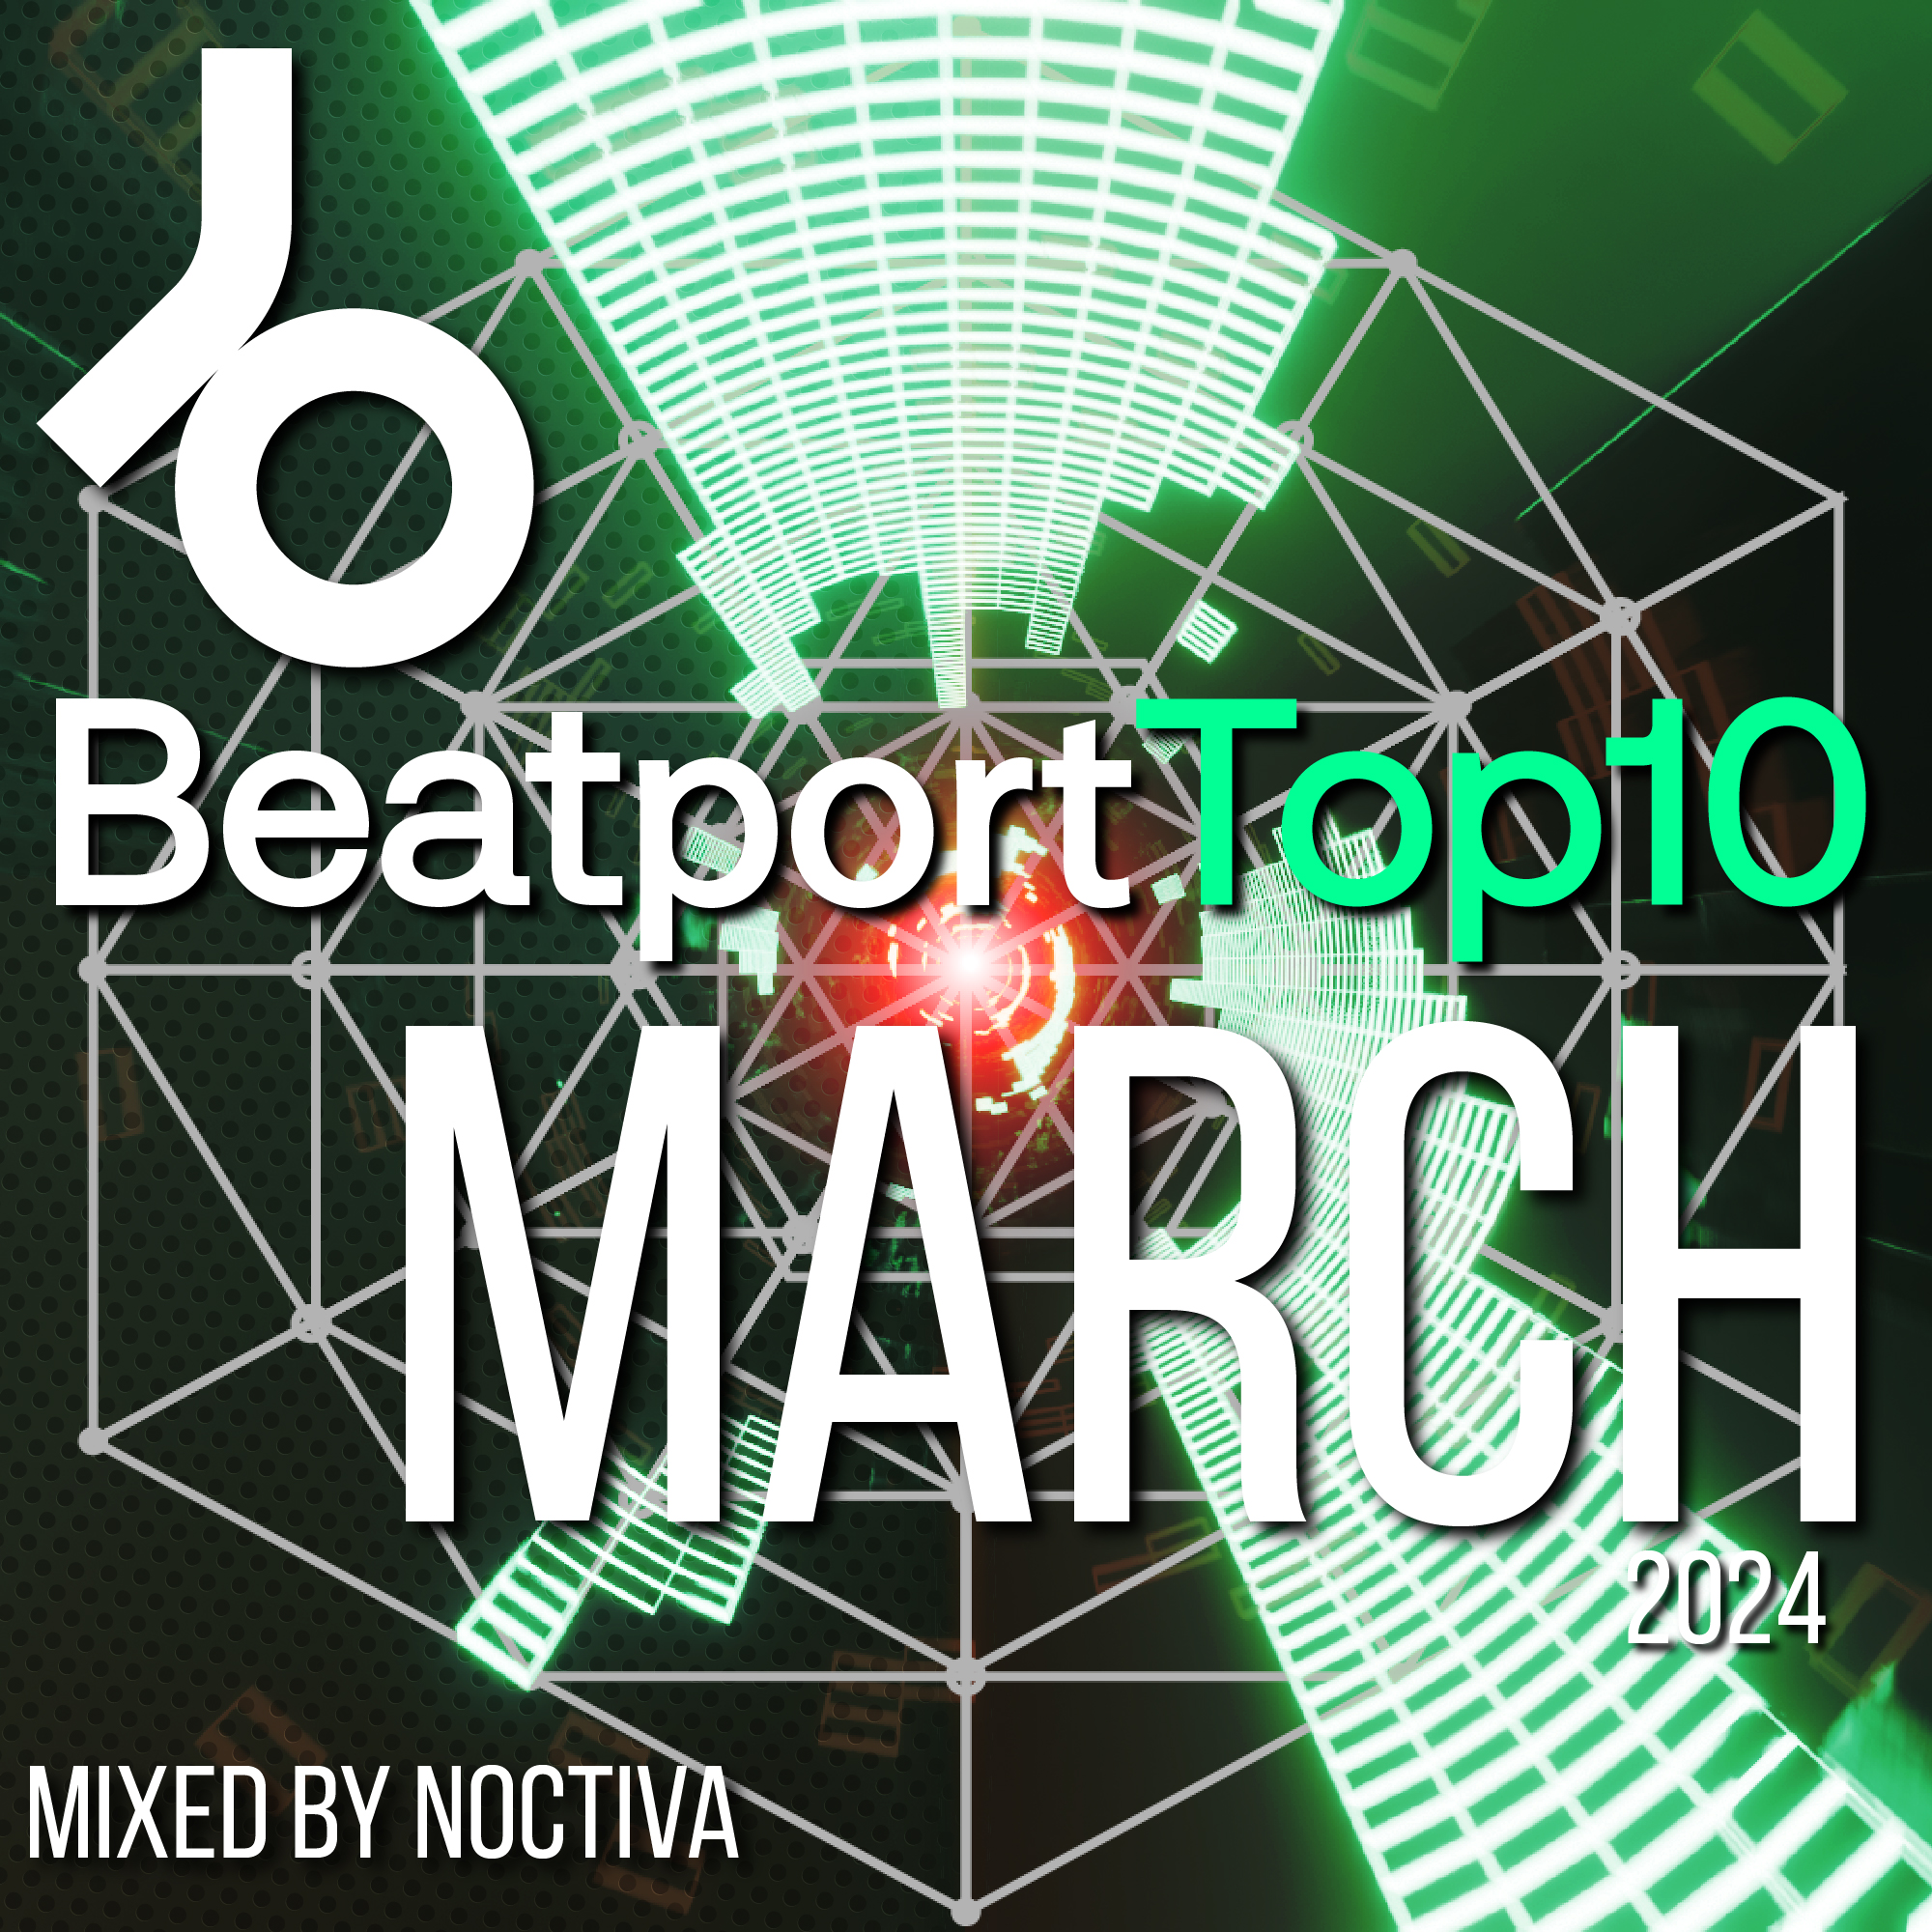 BeatPort Top10 – March 2024, mixed by Noctiva